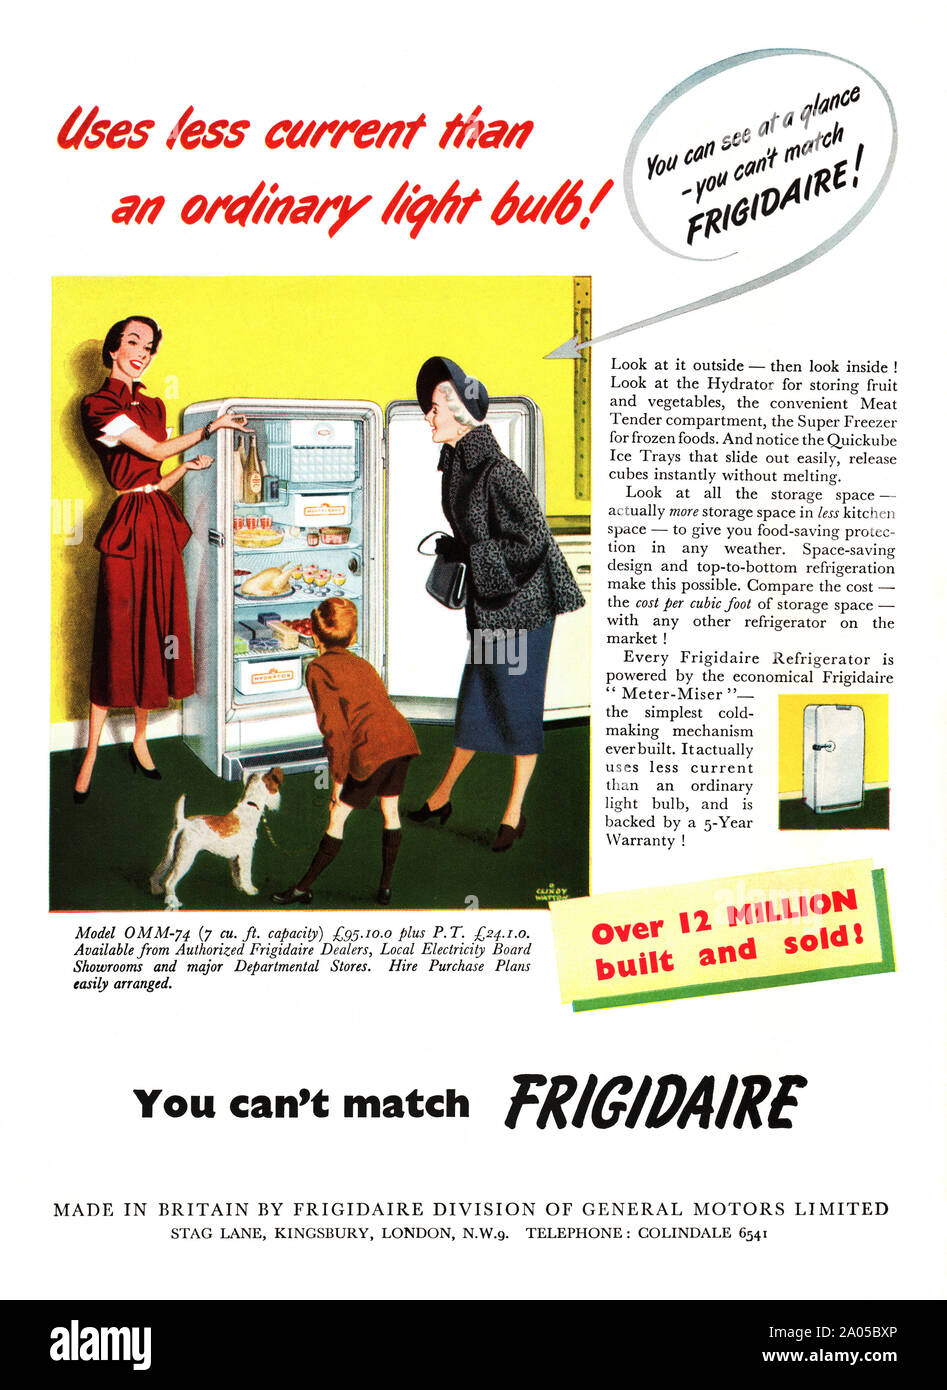 Advert for a Frigidaire refrigerator, 1951. The illustration shows women discussing how economical the fridge is. The brand was so well known in the refrigeration field in the that many Americans called any refrigerator a Frigidaire regardless of the maker. Stock Photo